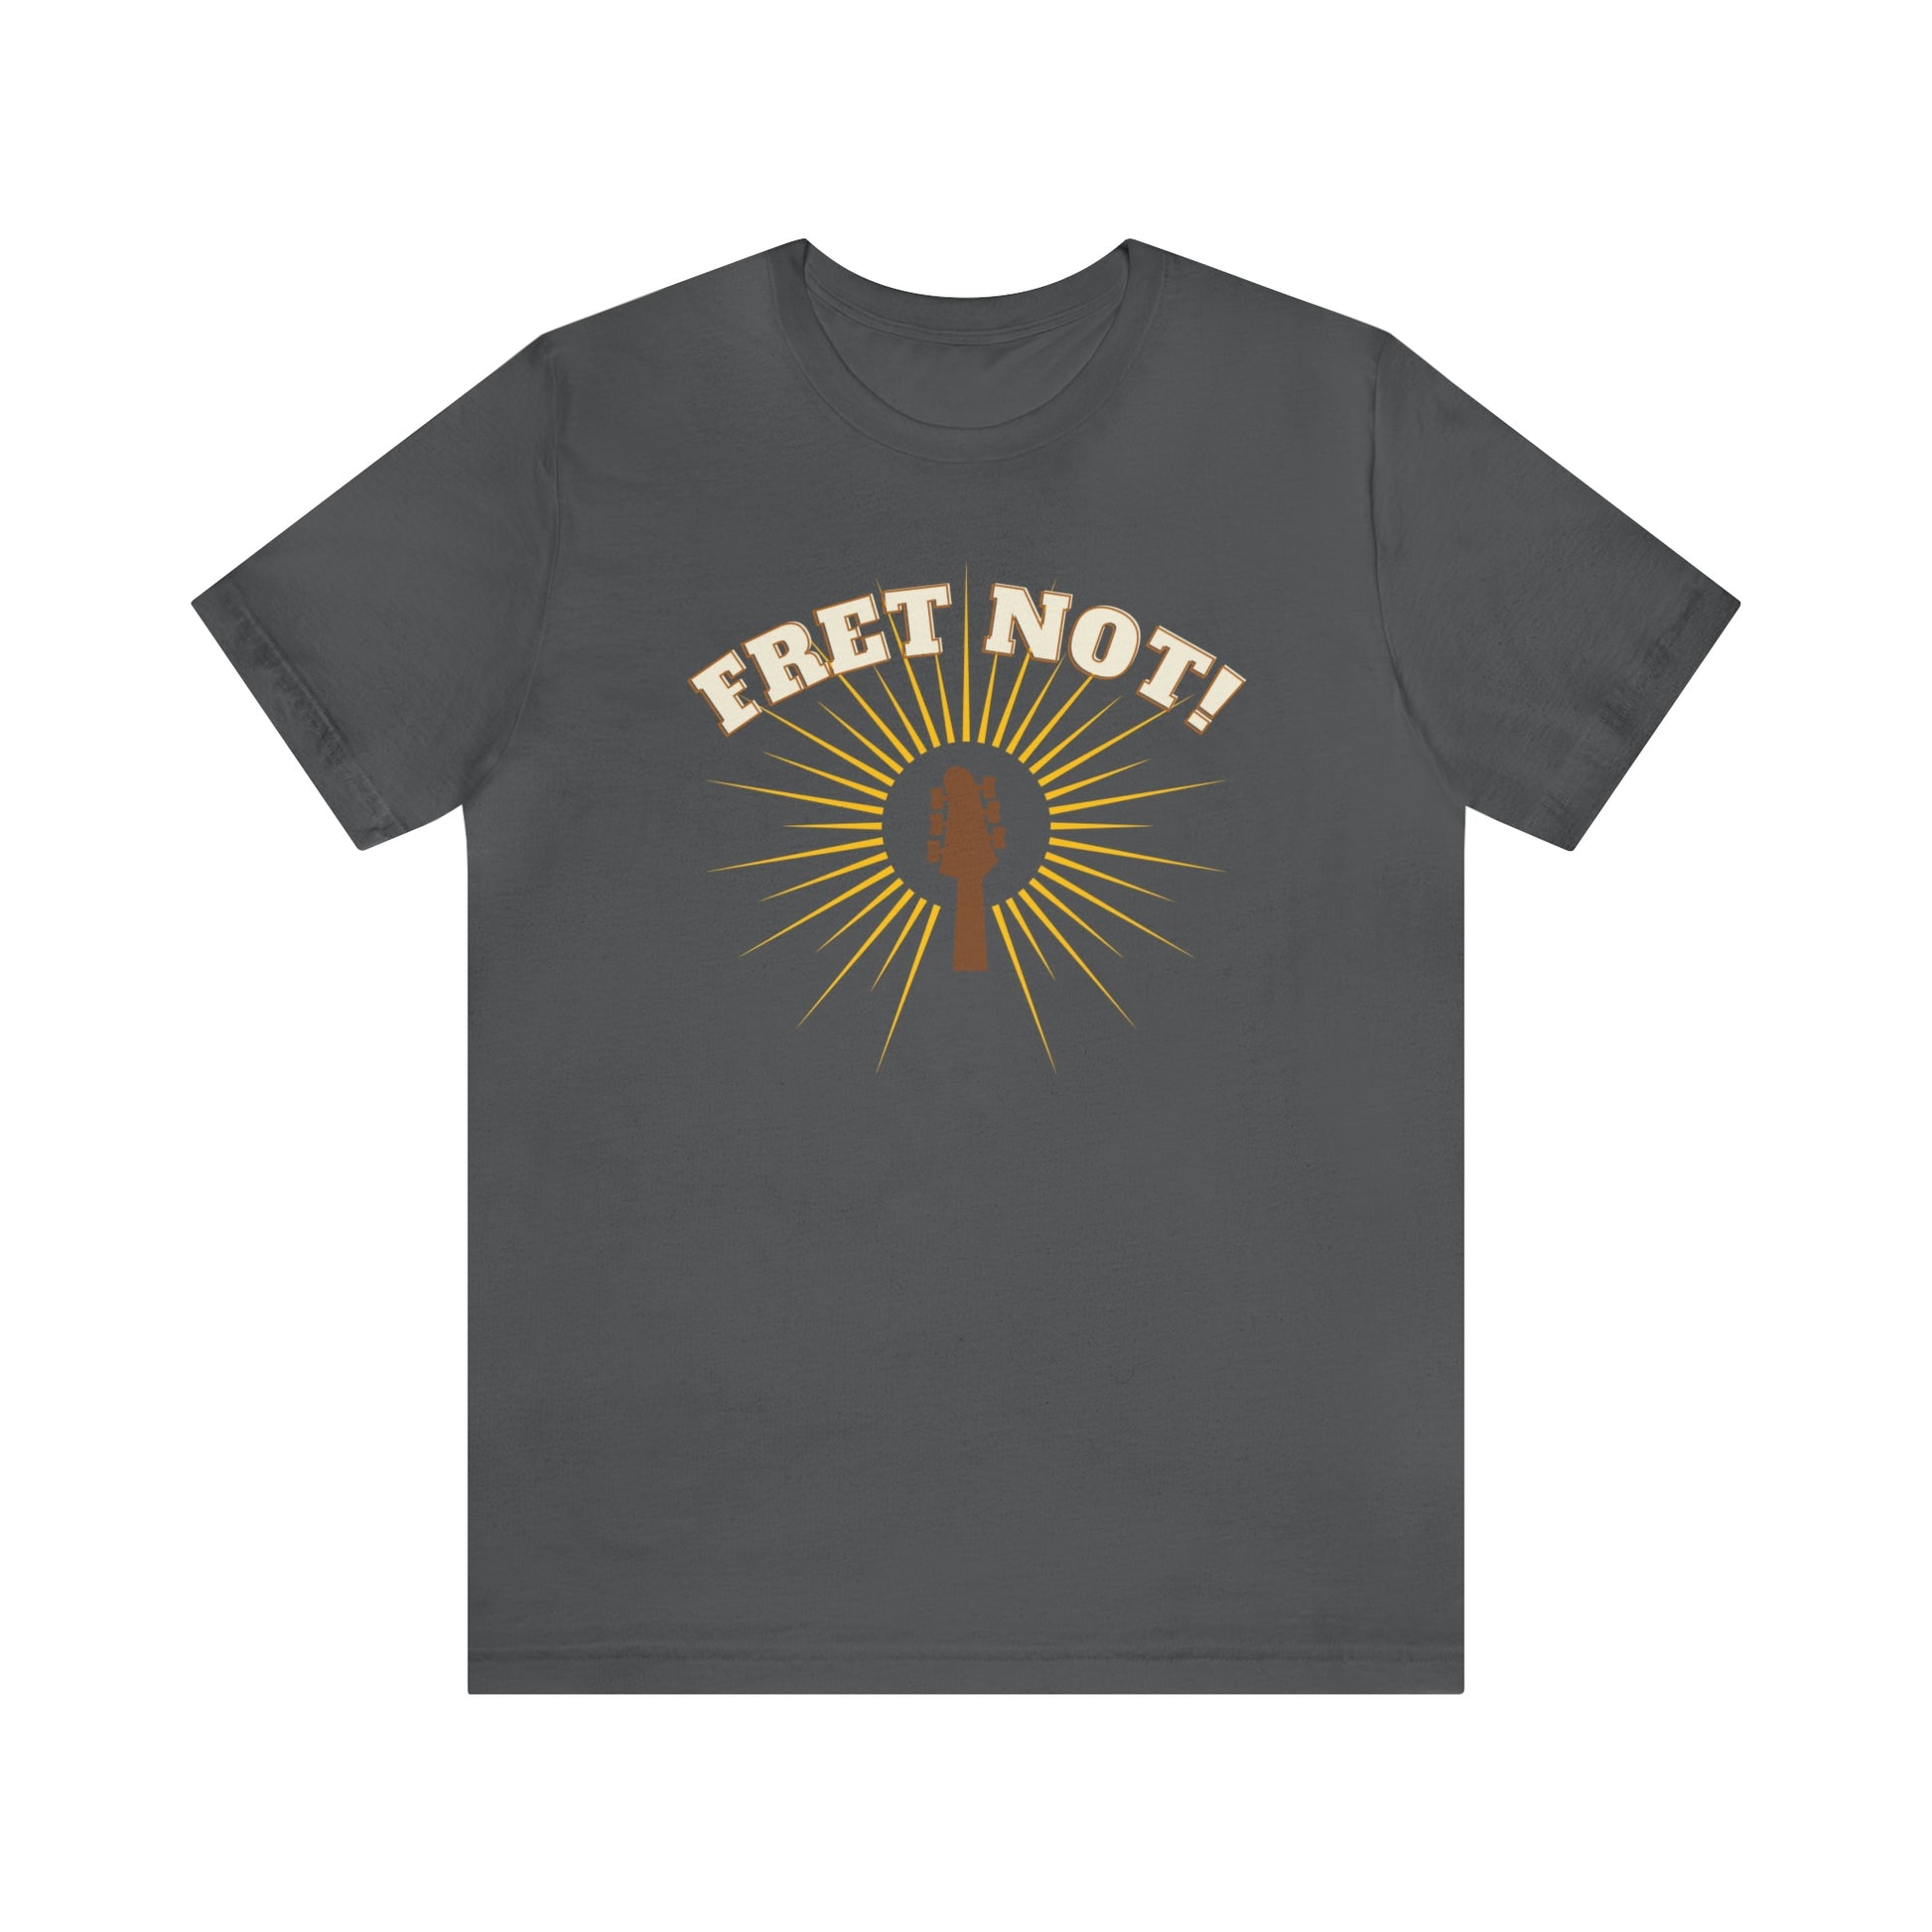 A T-shirt with the text "Fret not" and a picture of a guitar with a halo surrounding it